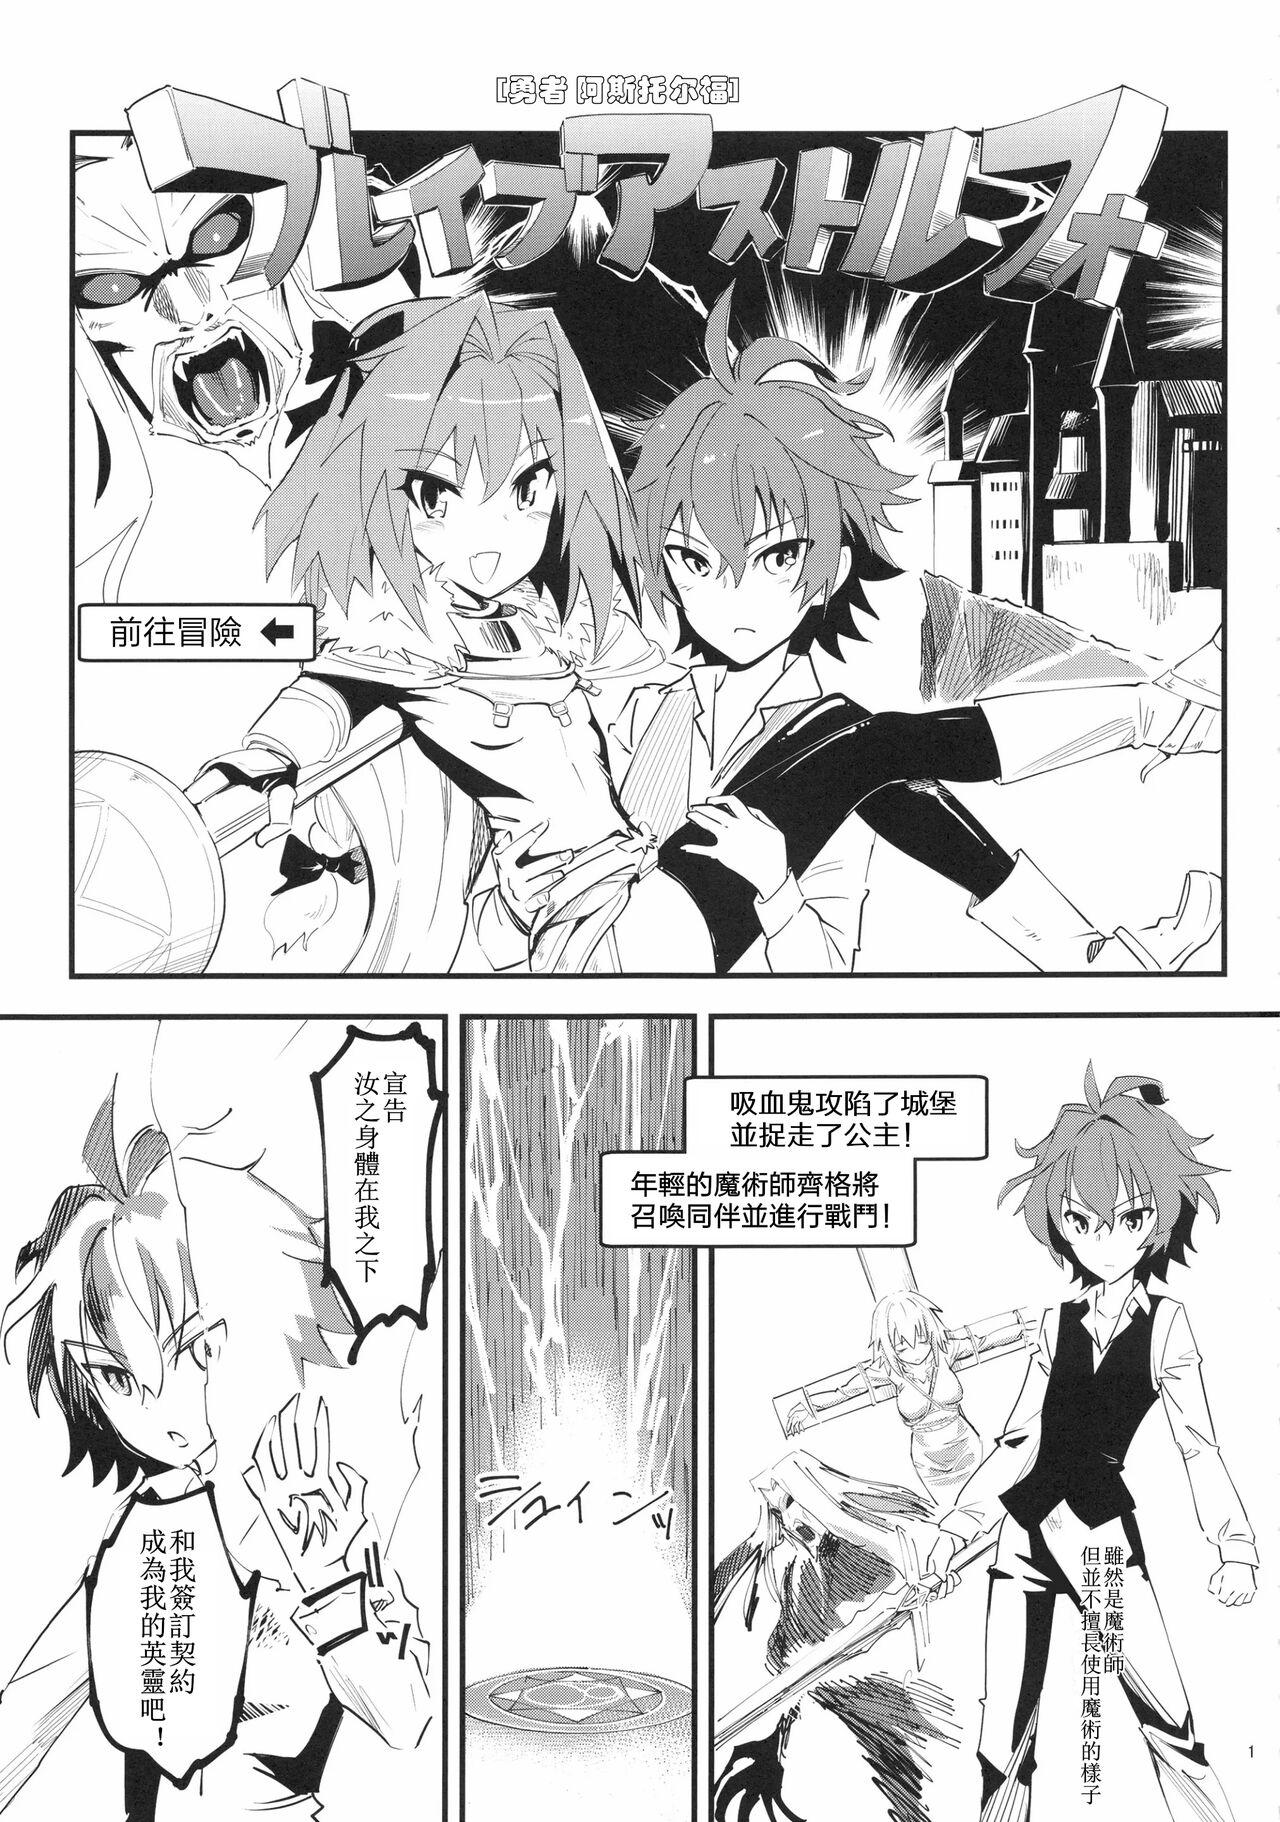 Rubbing CLASS CHANGE!! Brave Astolfo - Fate apocrypha British - Page 3